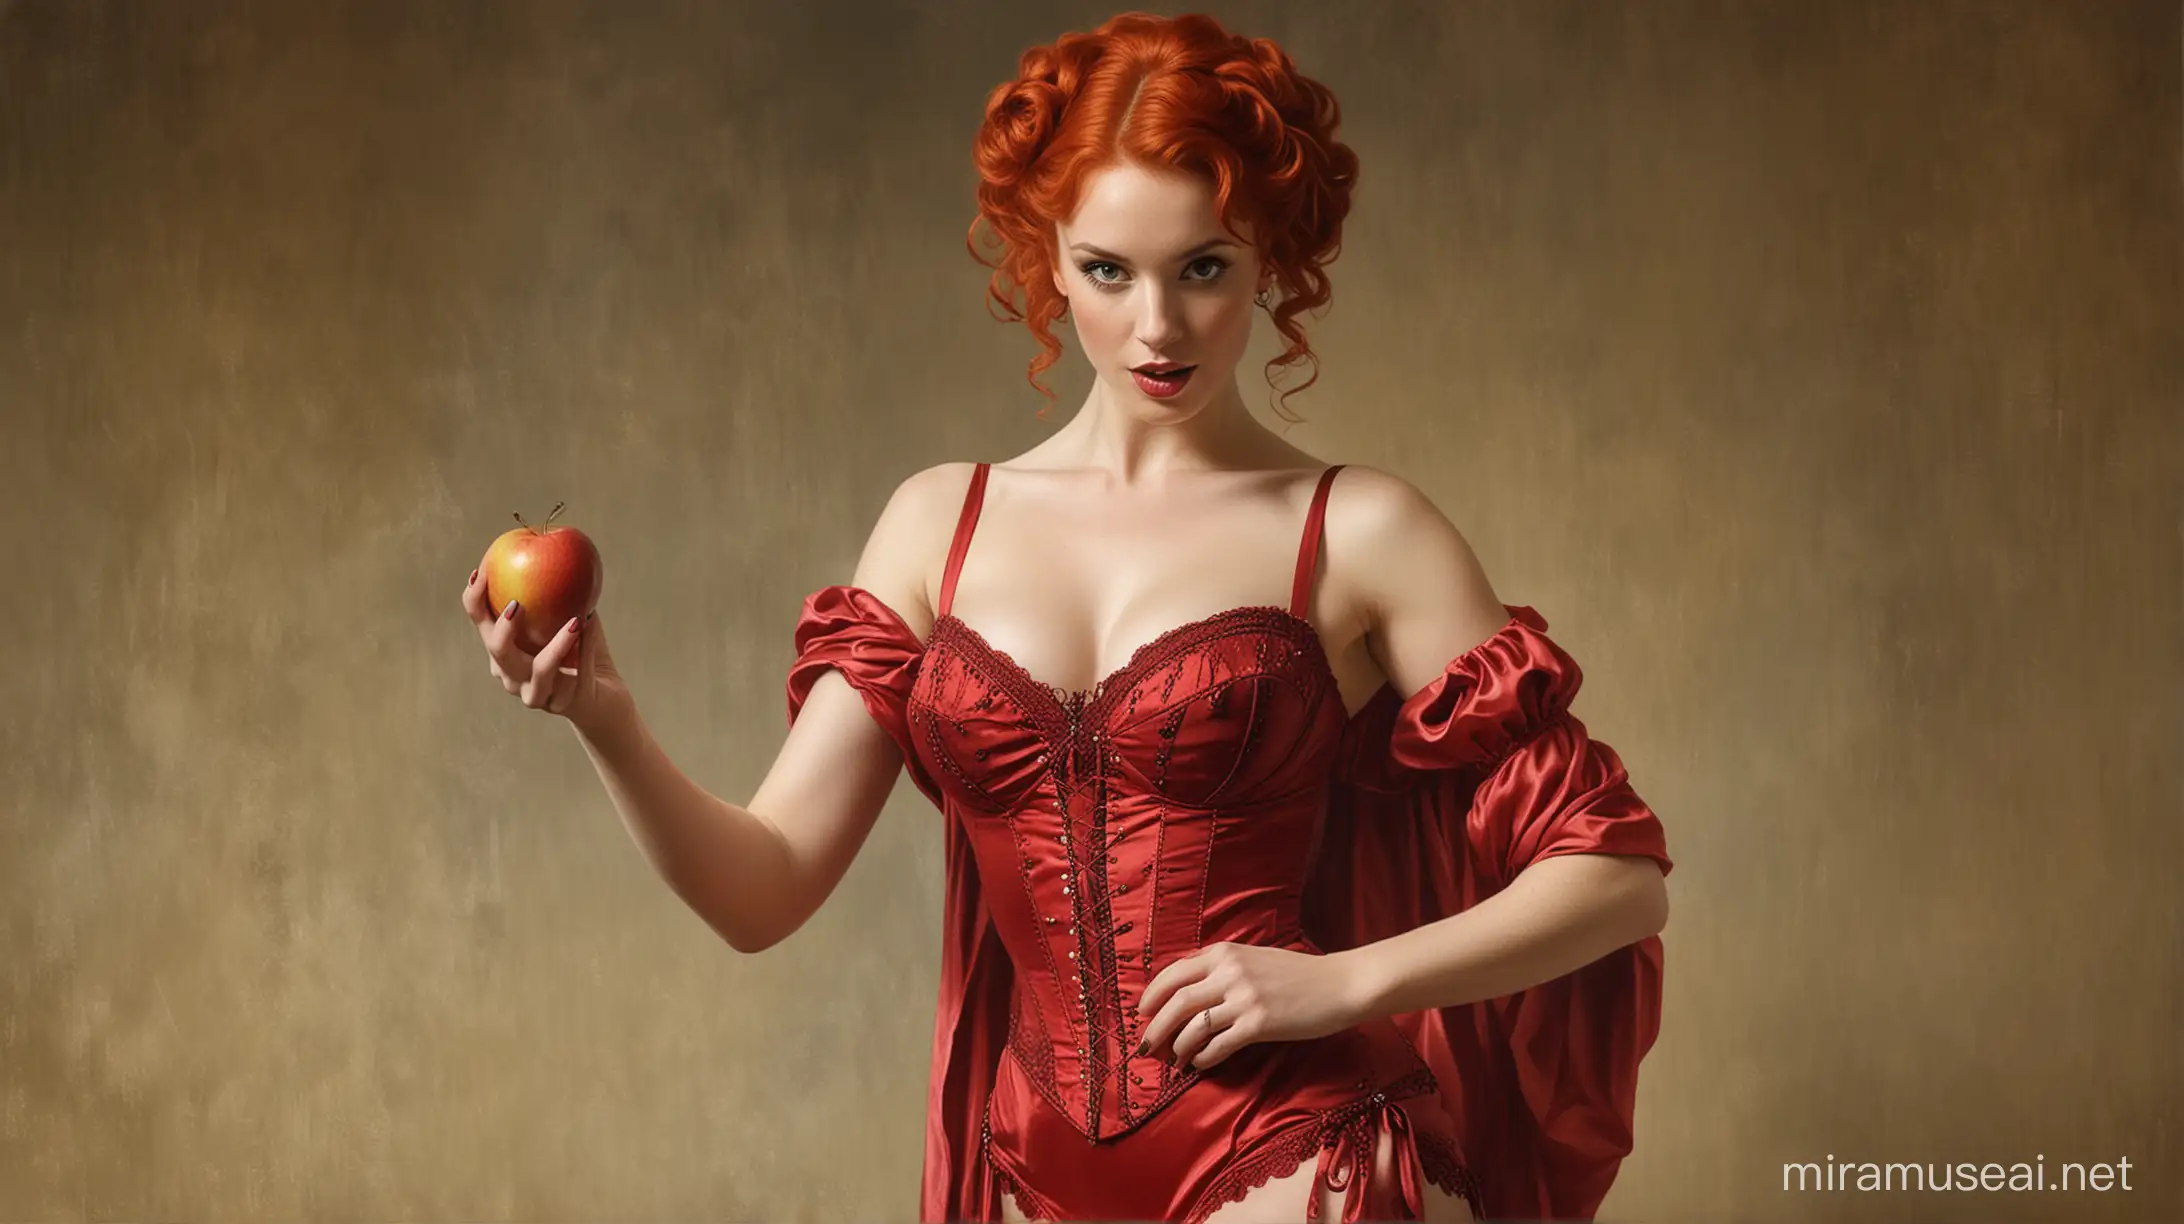 burlesque danser with red hair, red clothes and an apple in her hand based on the painting lilith by john collier